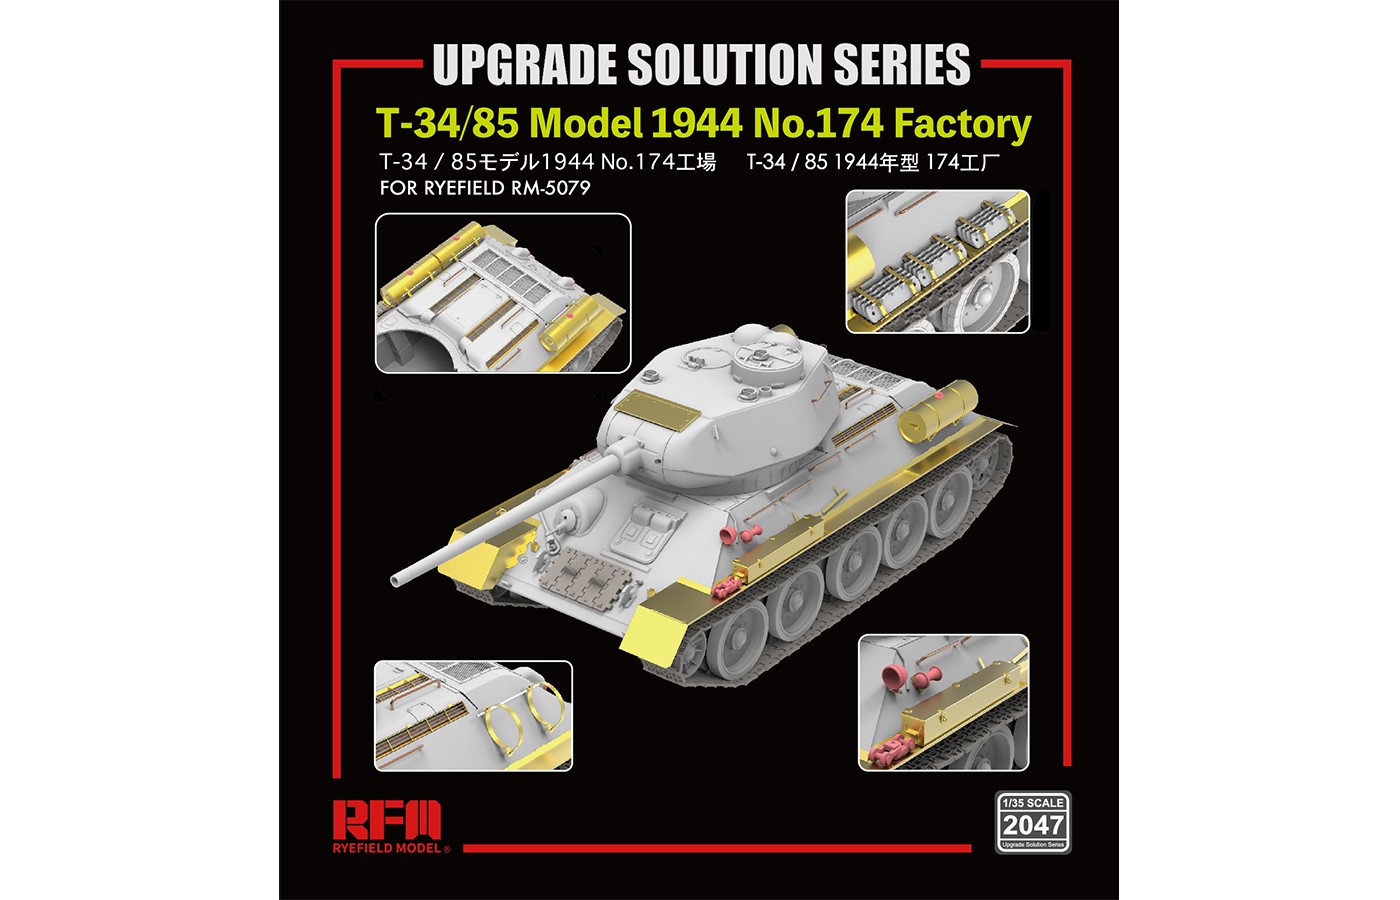 RM-2047 T-34/85 Model 1944 Factory No.174 UPGRADE SOLUTION SERIES